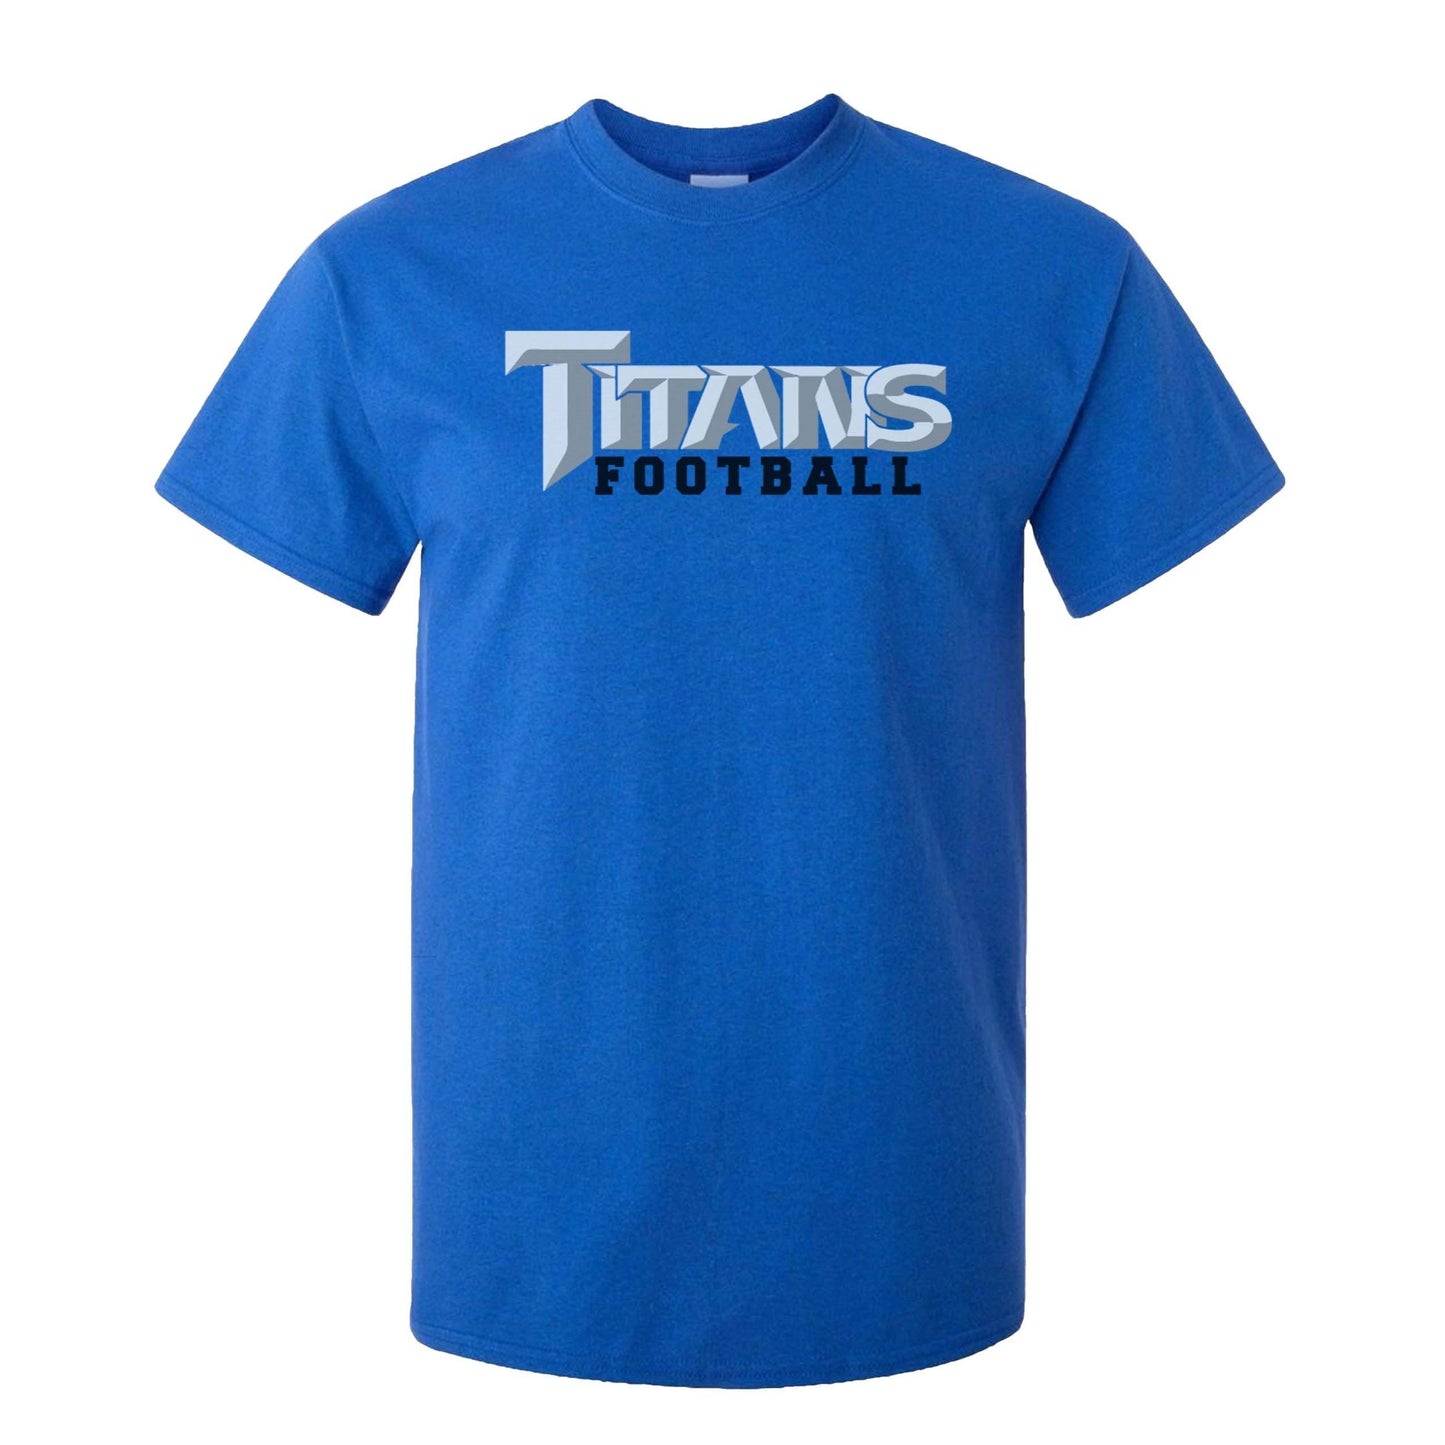 Titans Football Tee: Mens & Youth Sizes